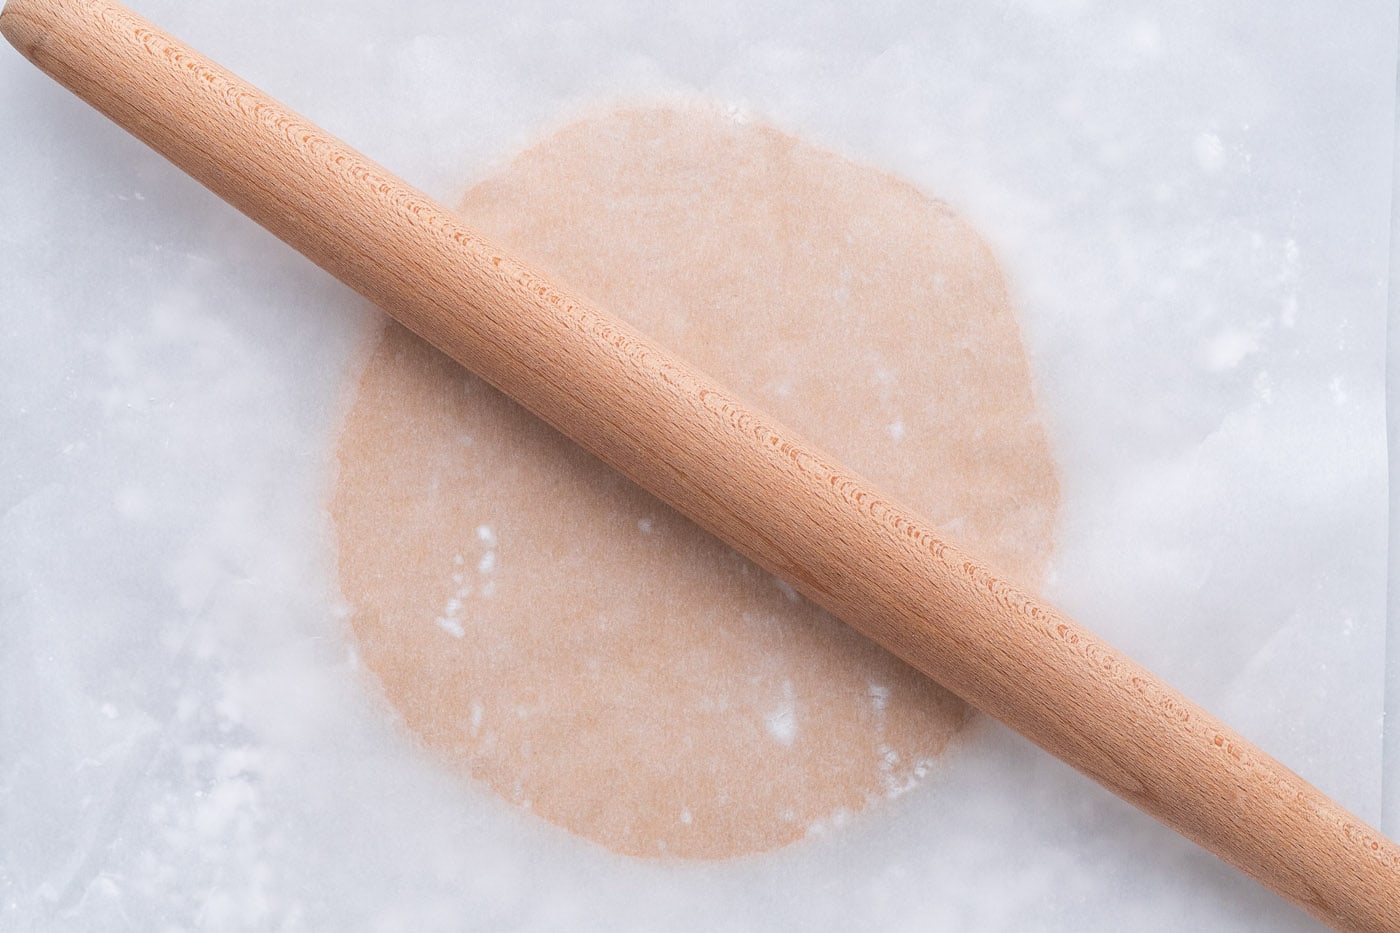 rolling the peanut butter dough ball with a rolling pin